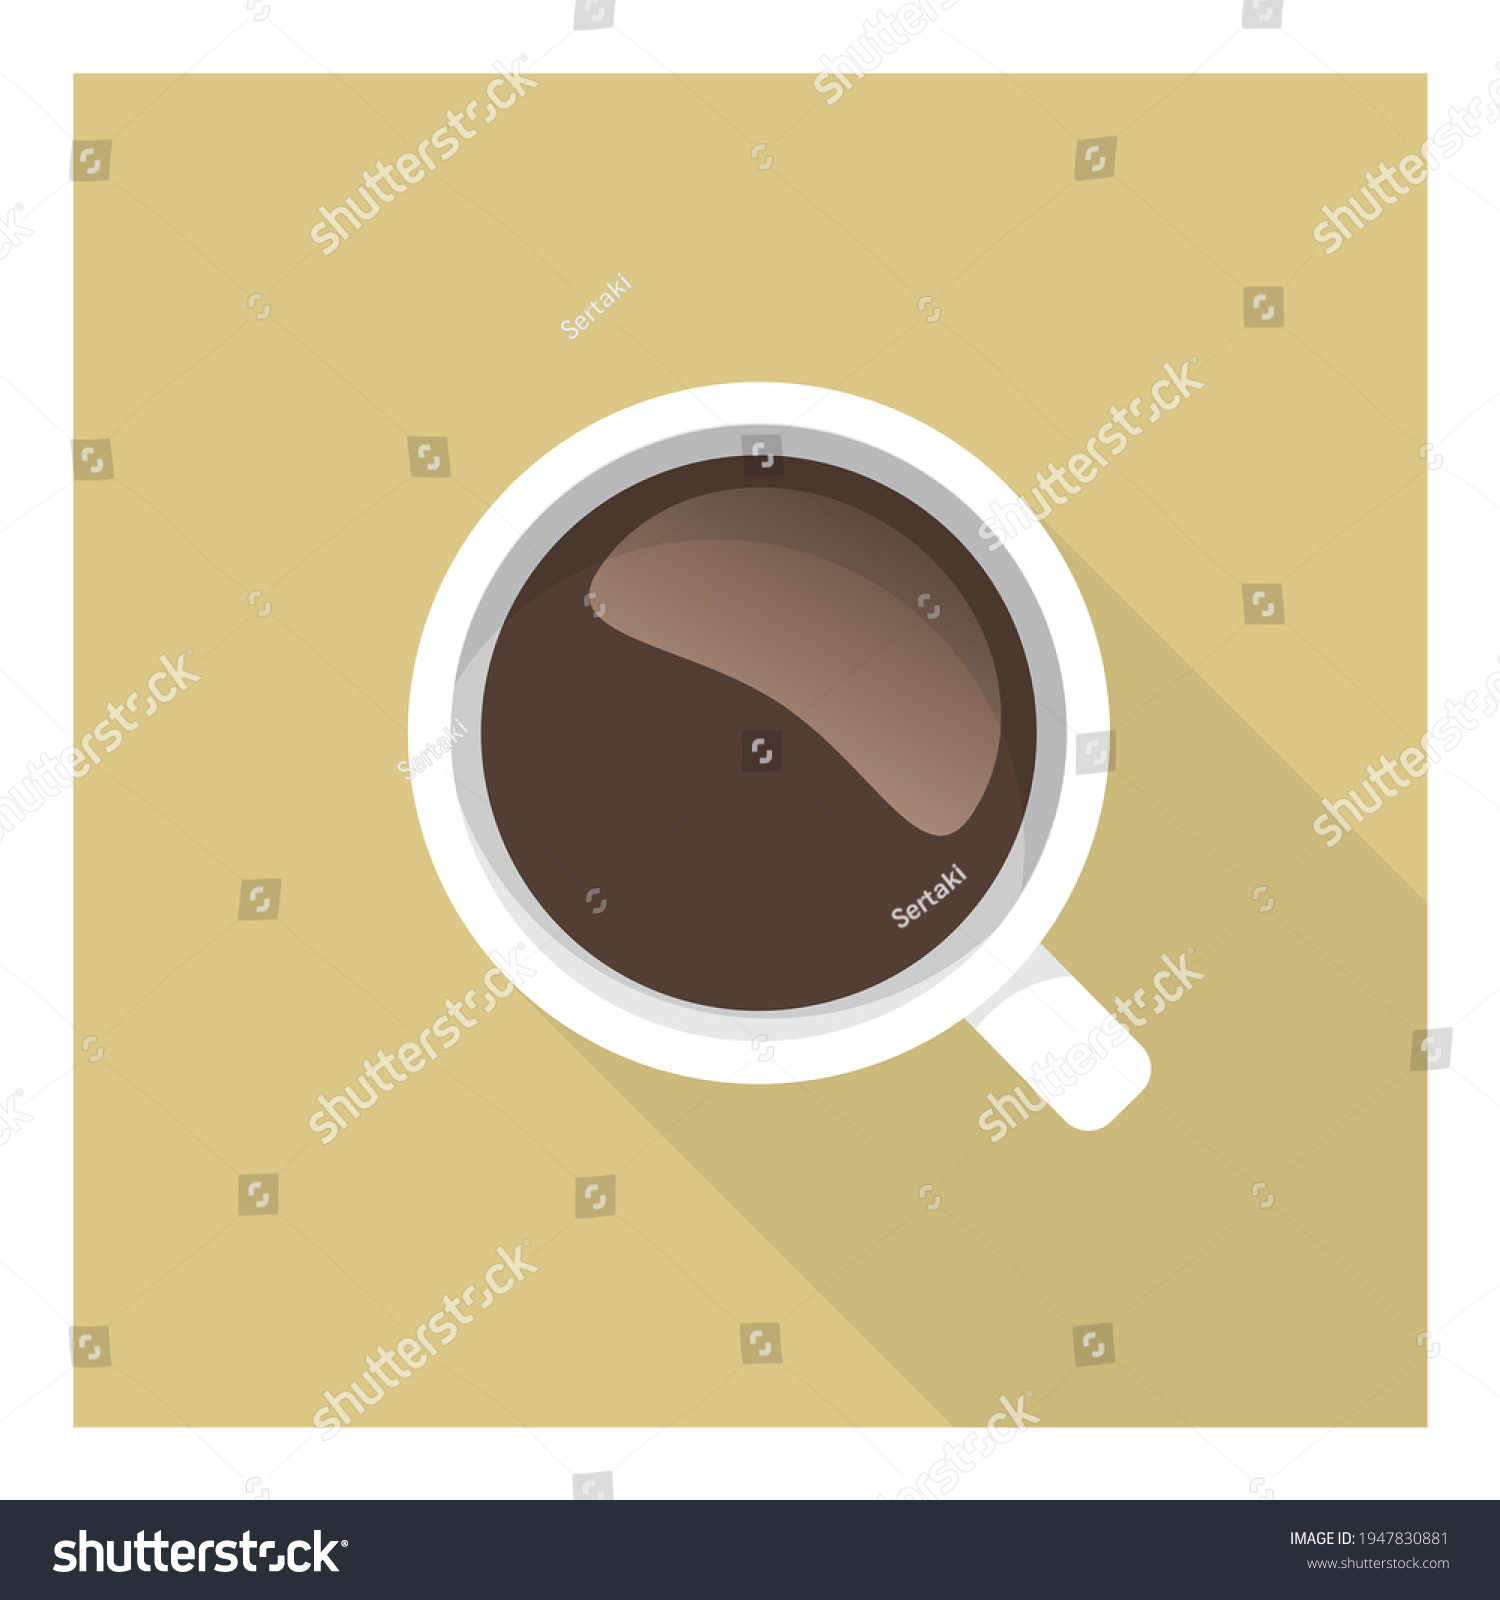 SVG of Coffee cup icon top view. Simple geometric graphic white americano coffee cup isolated on khaki background. Flat vector eps 10 illustration icon. Coffee break lover concept. Coffeemania.  svg